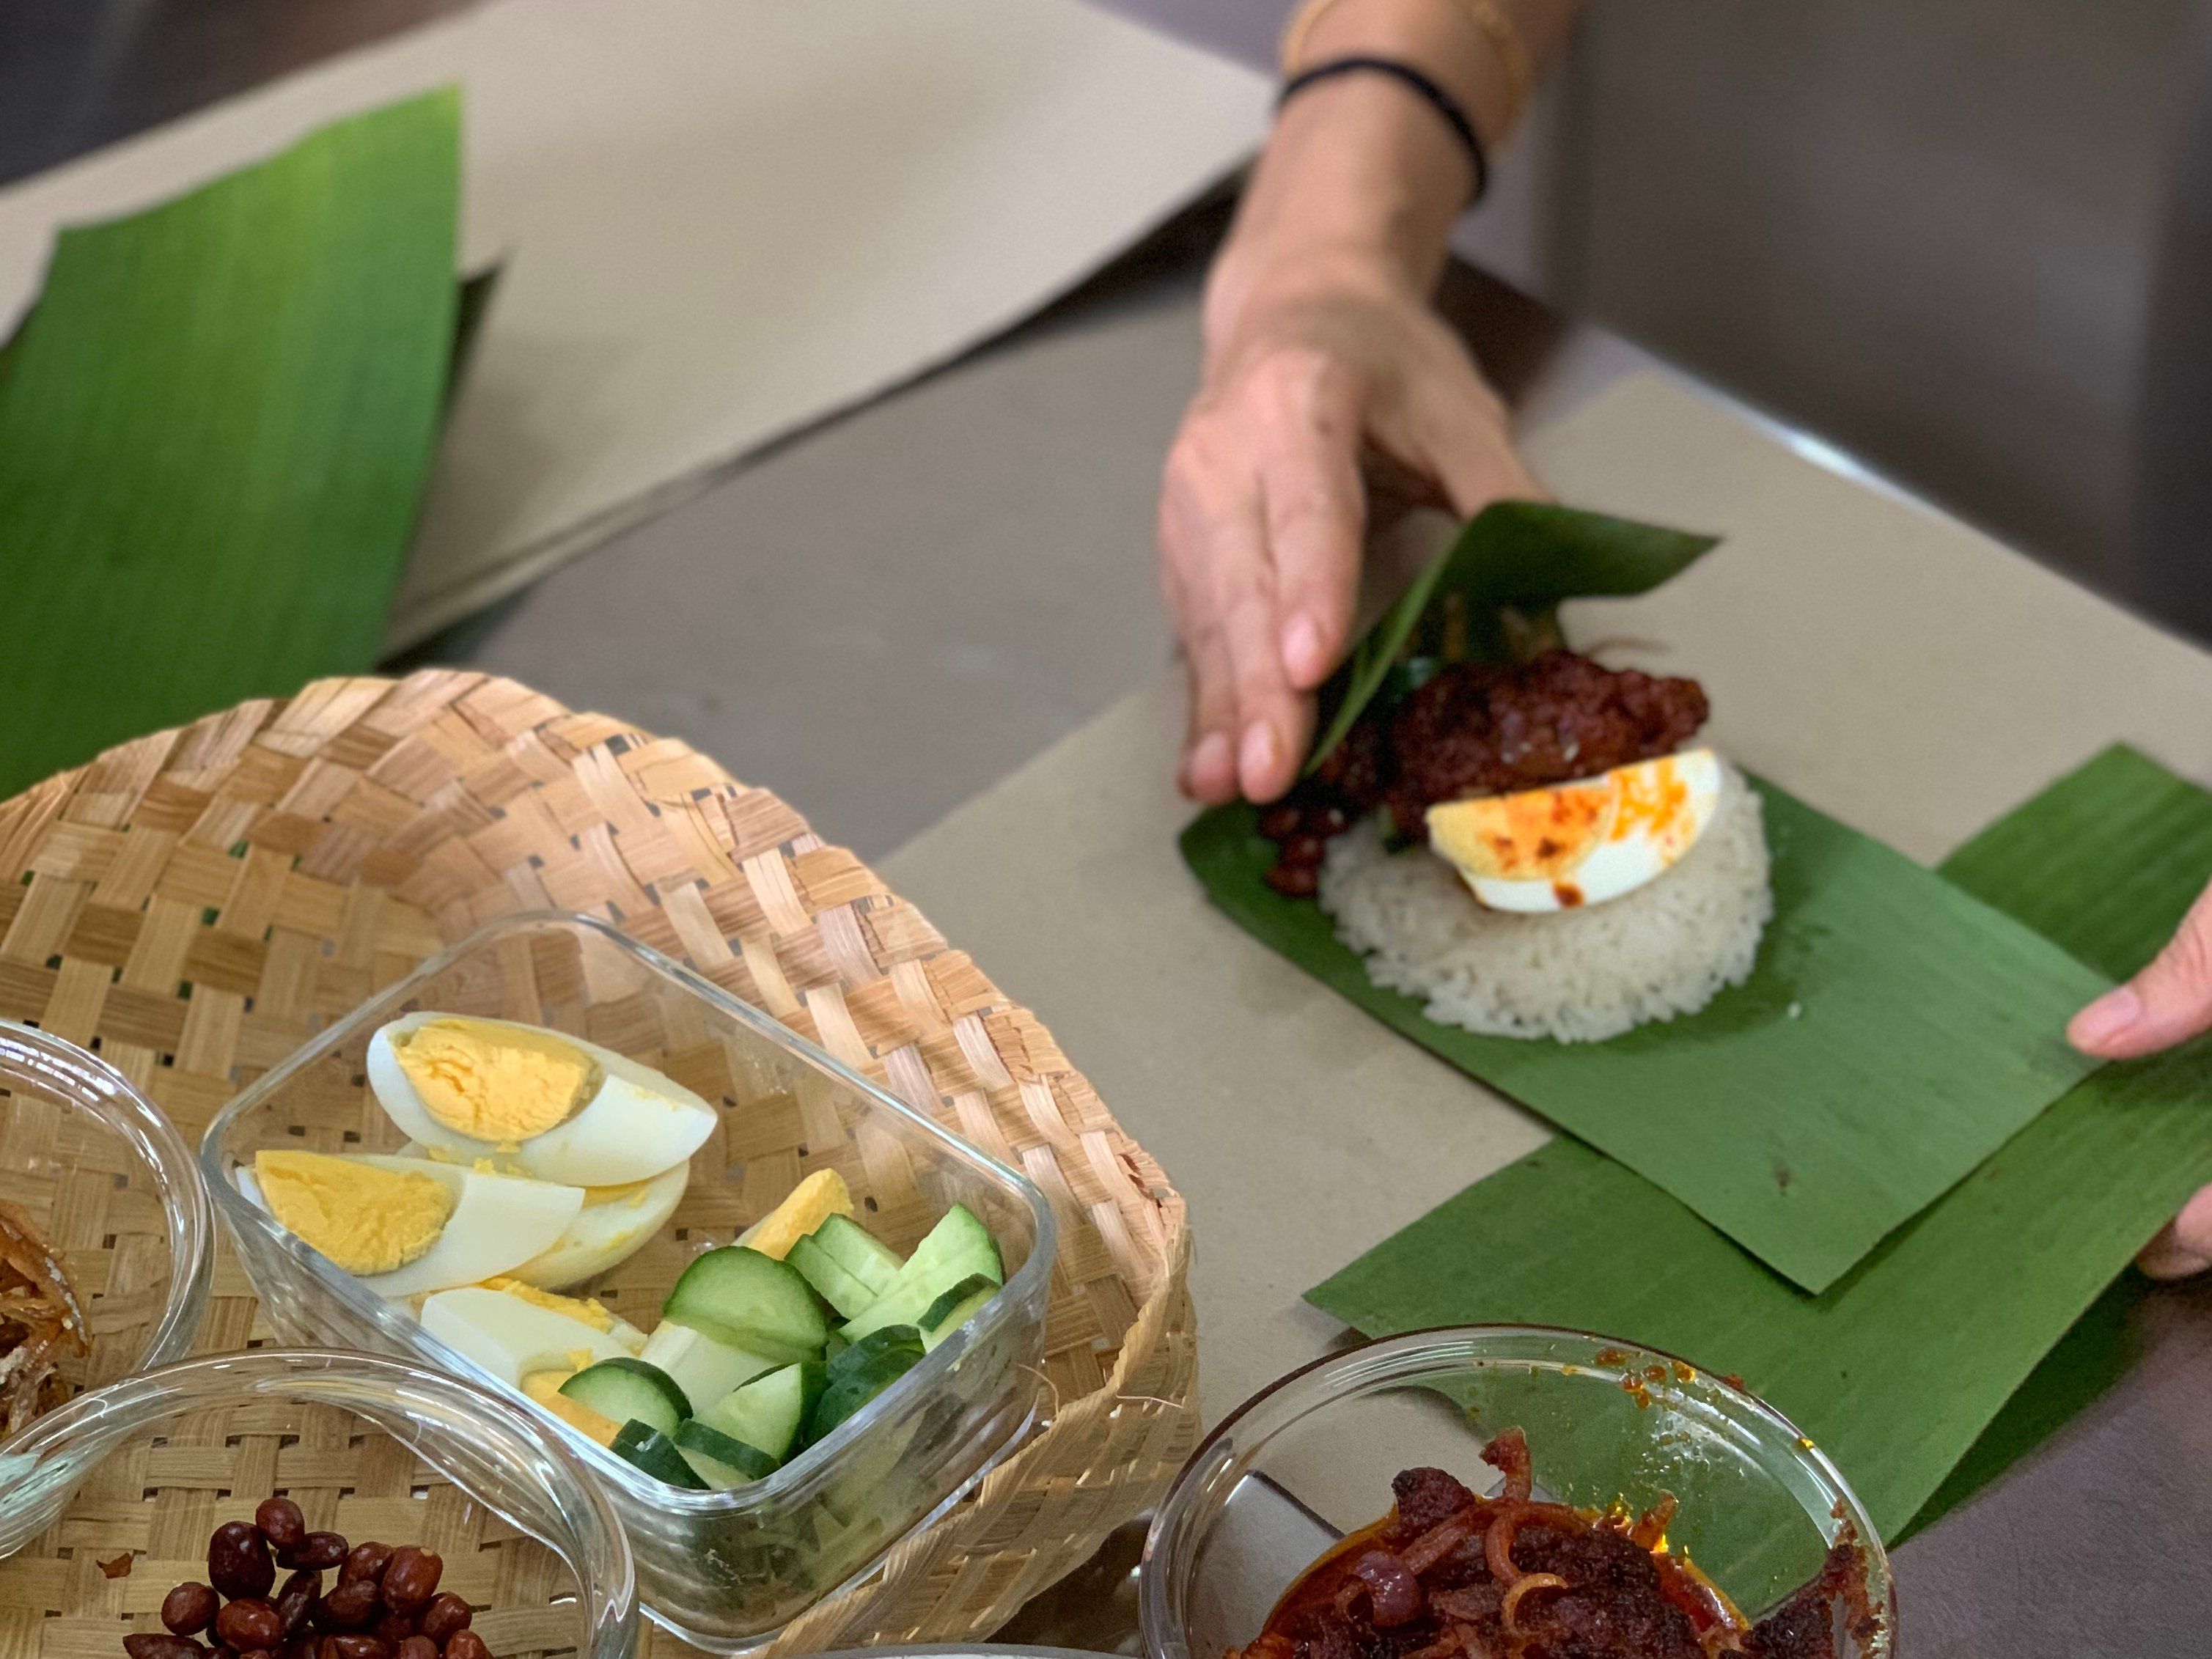 Authentic Malaysian Dishes Cooking Class At Home With Organic Garden Tour 